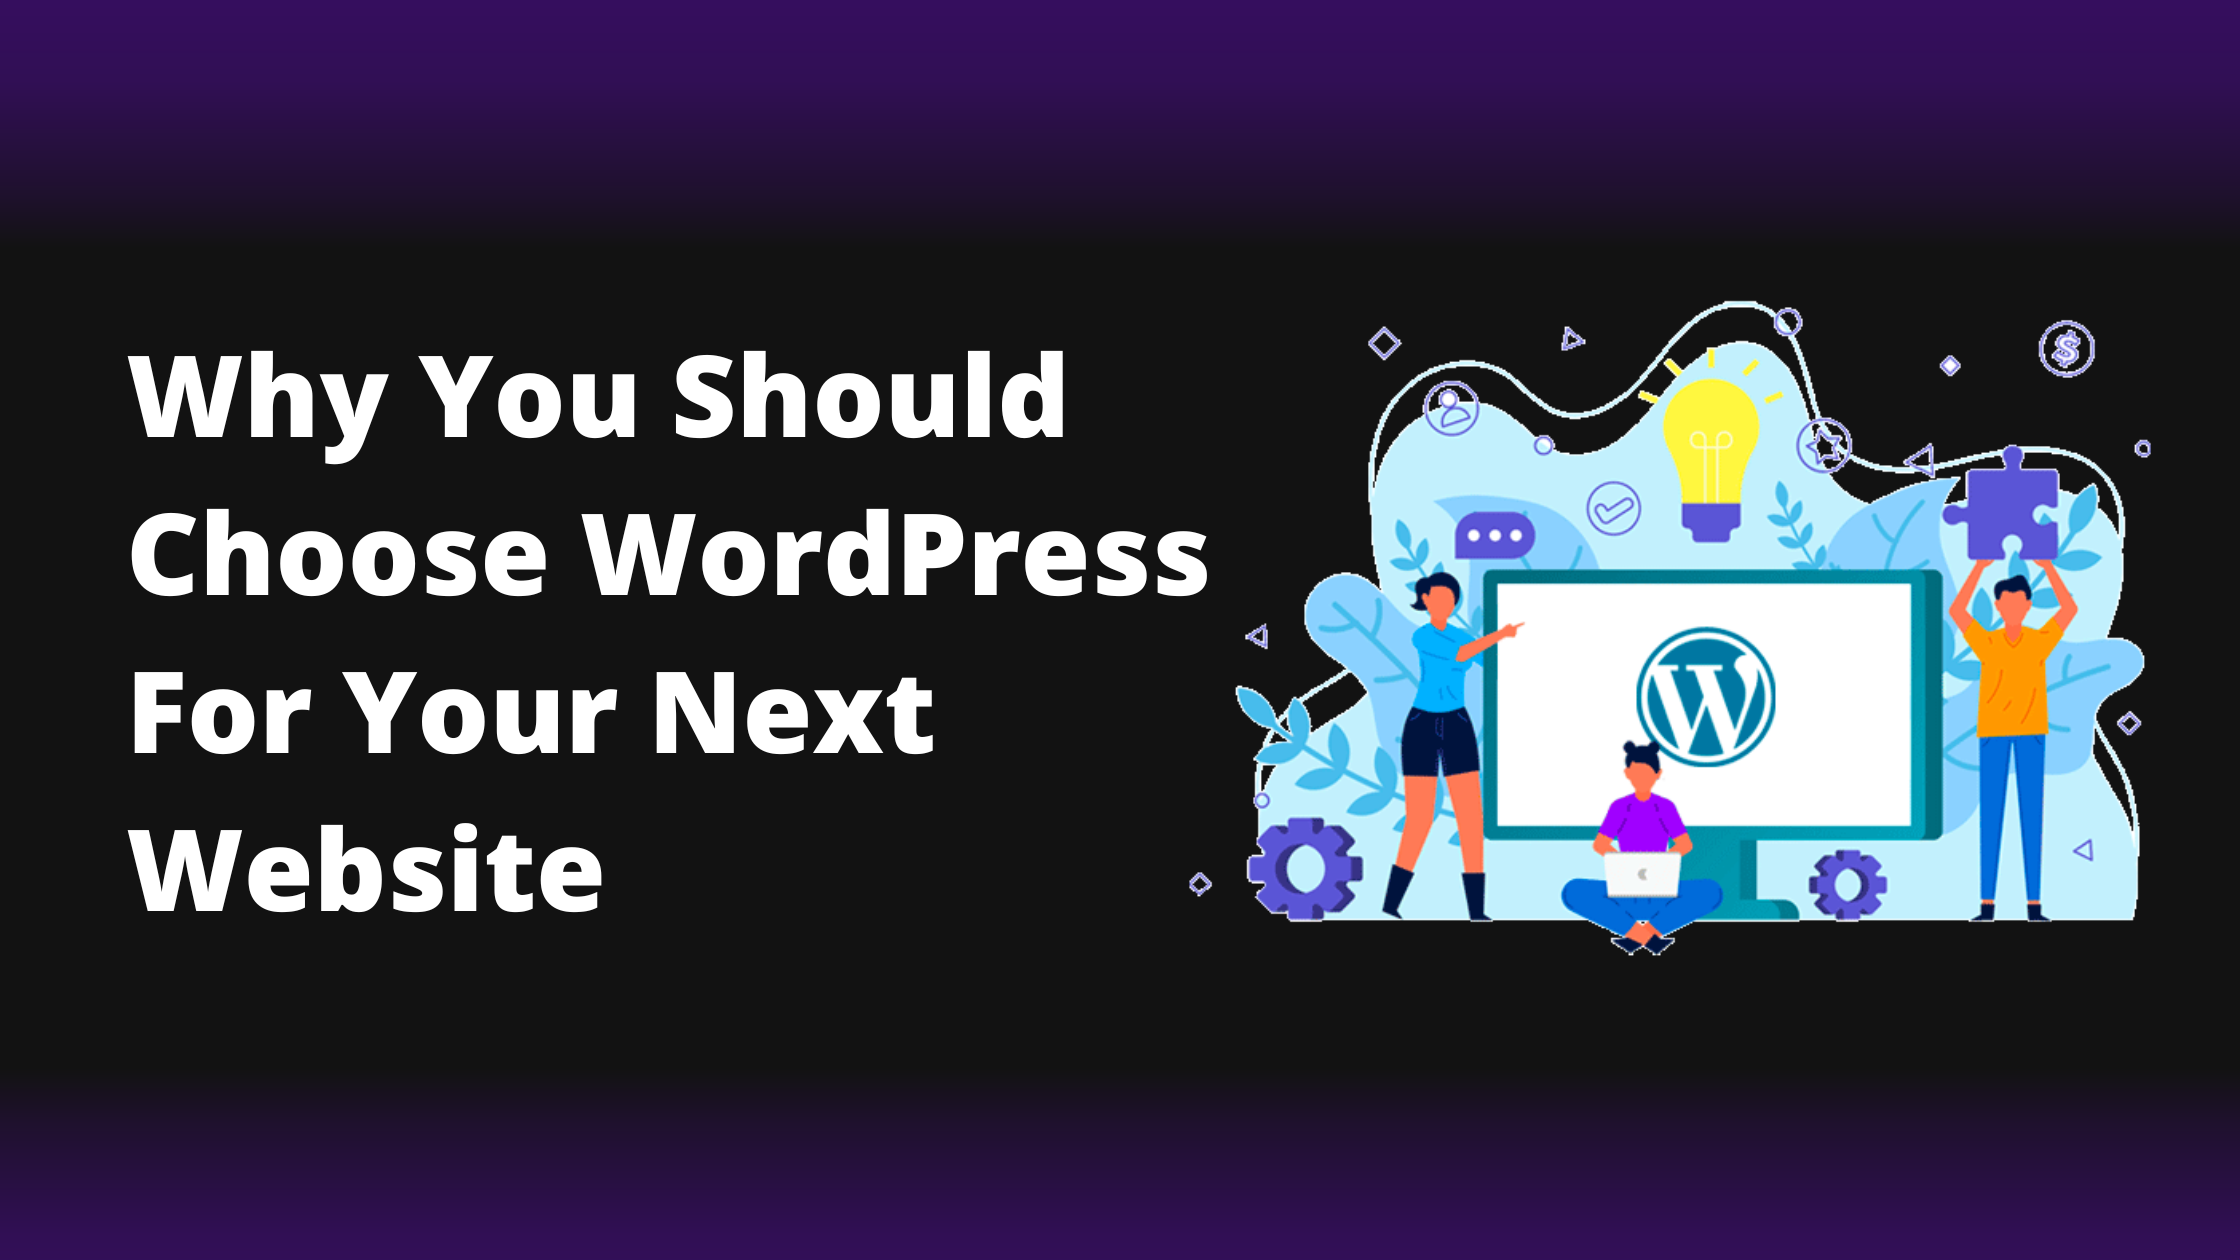 6.3 Why You Should Choose WordPress for Your Next Website.